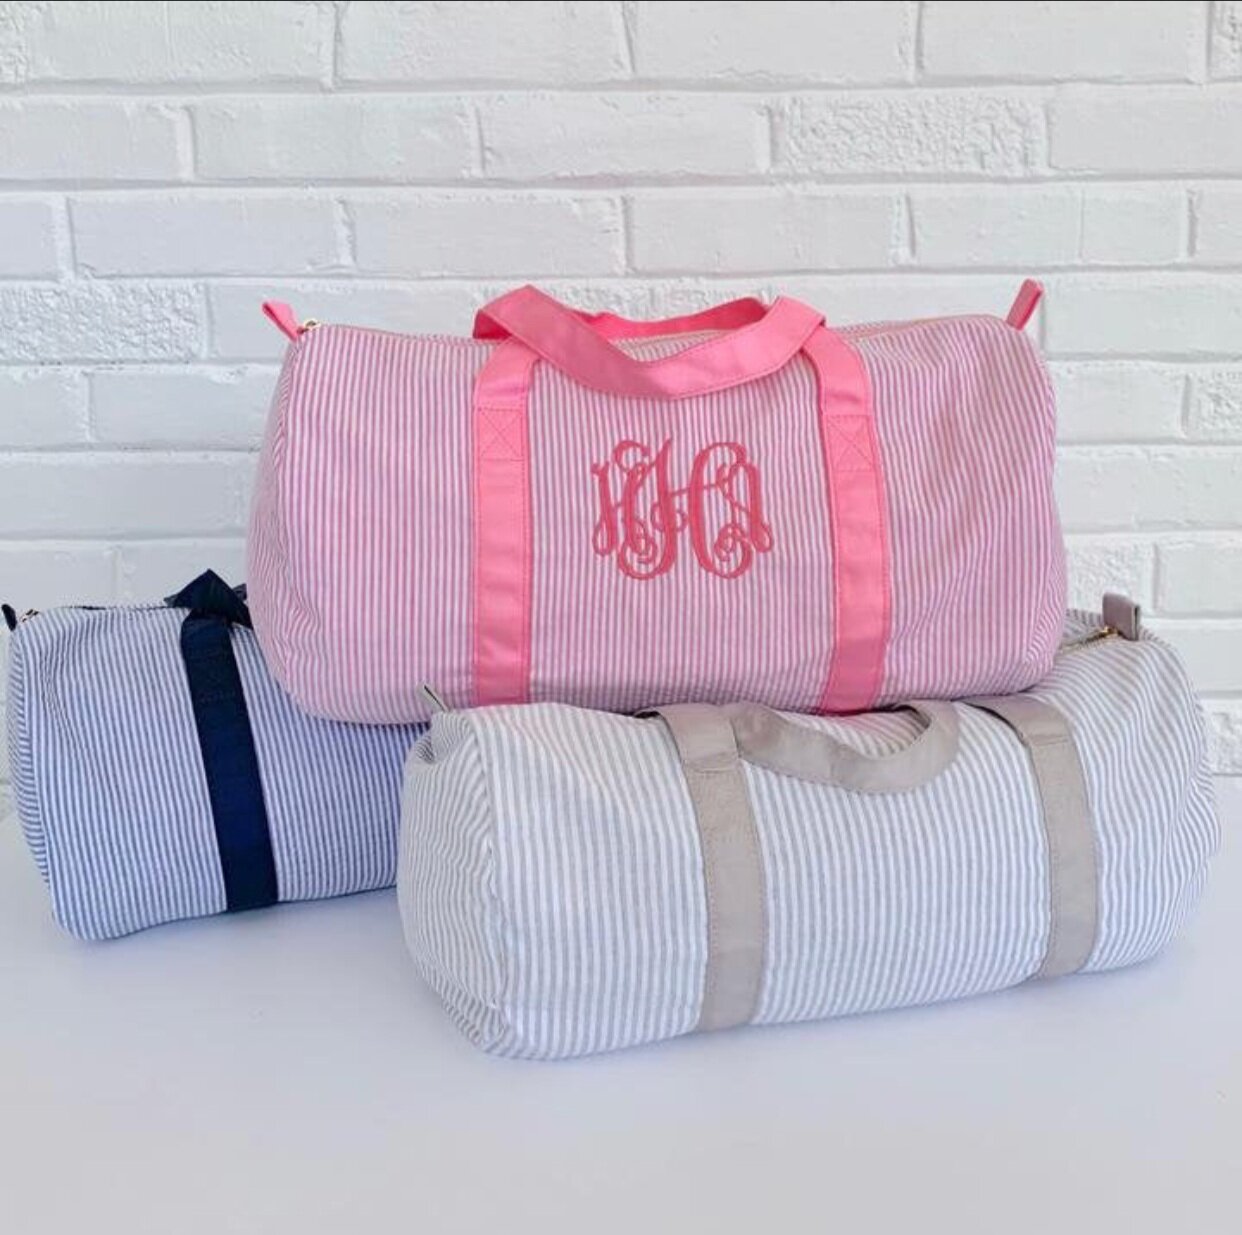 Personalized Duffle Bag — The Children's Shop